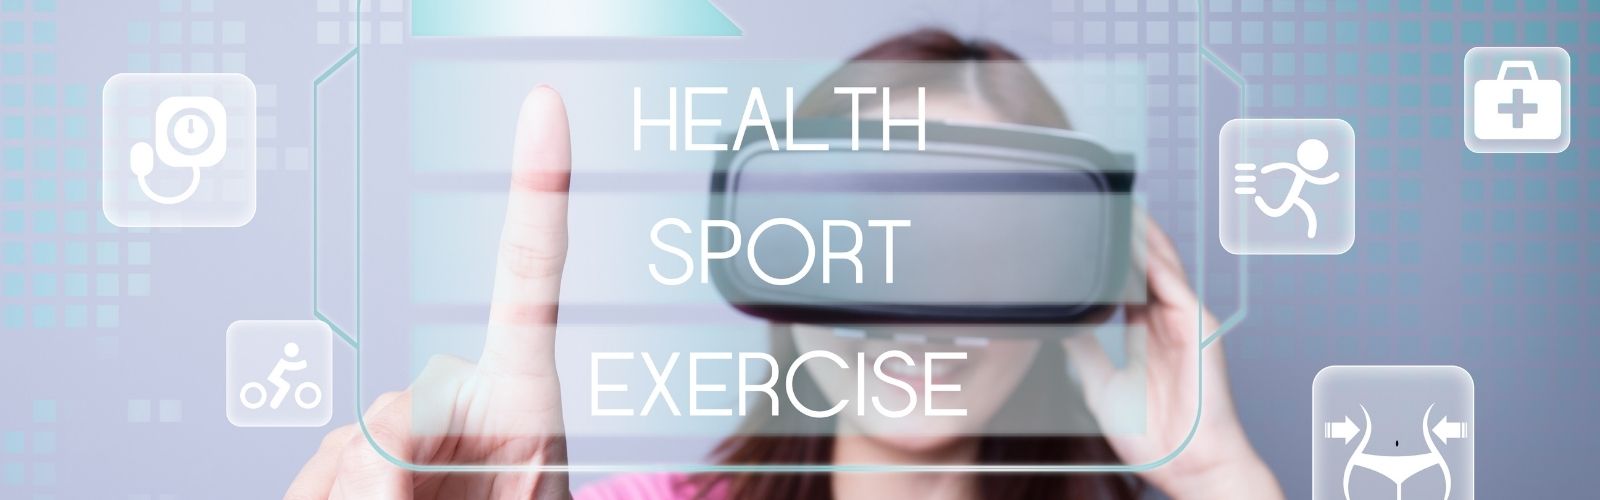 Vr Health Cover 